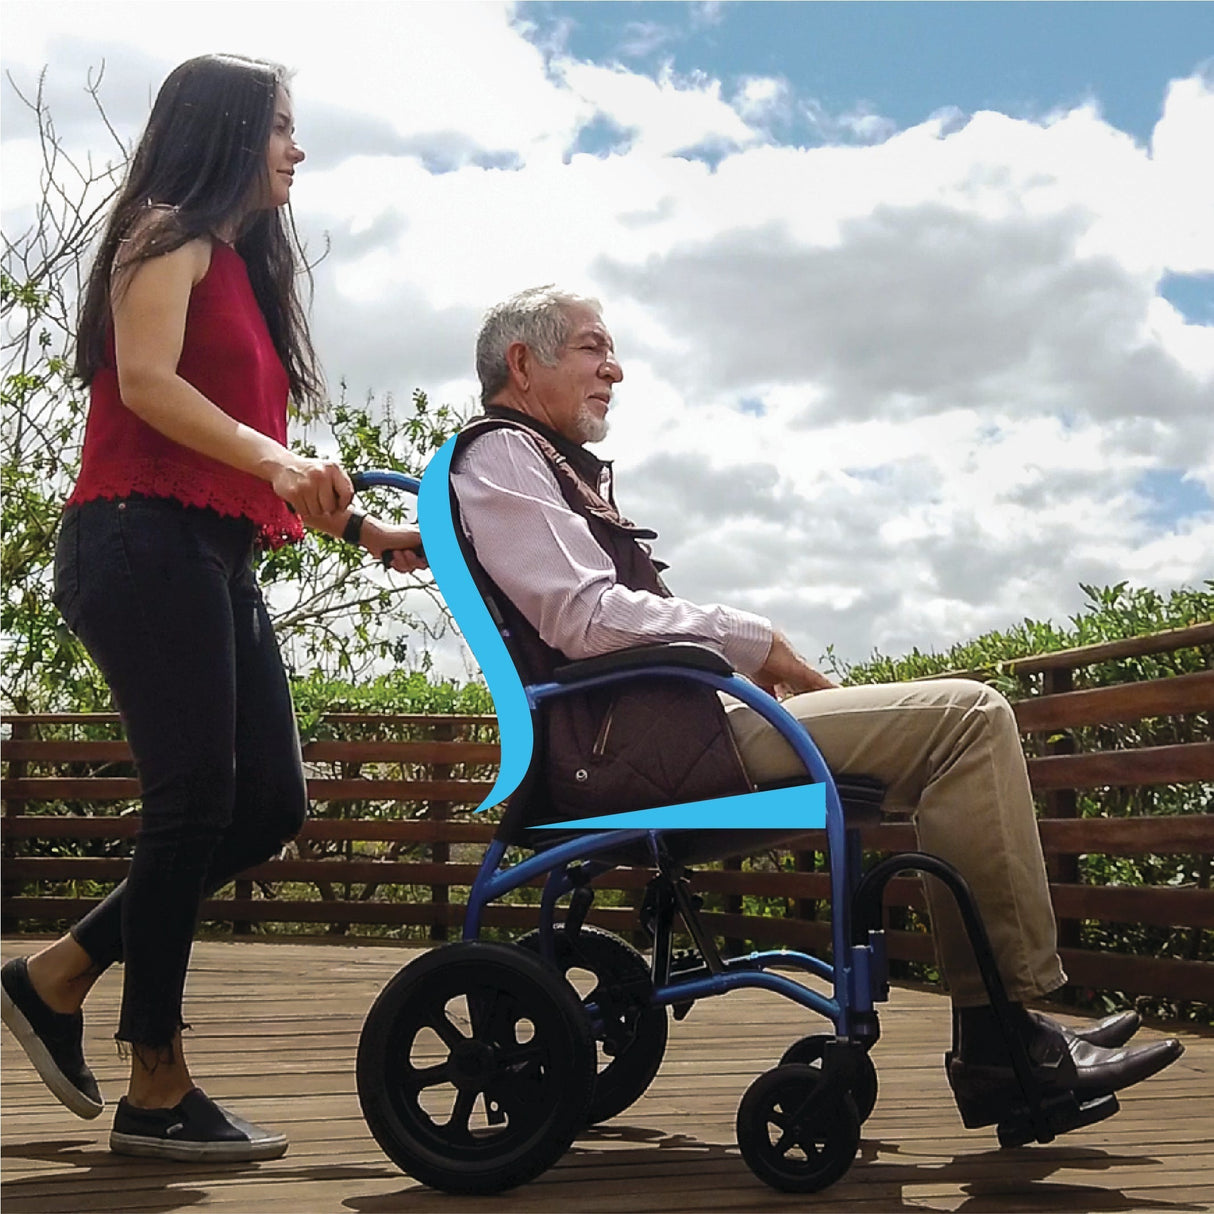 STRONGBACK 8 Transport Chair | Lightweight and Comfortable